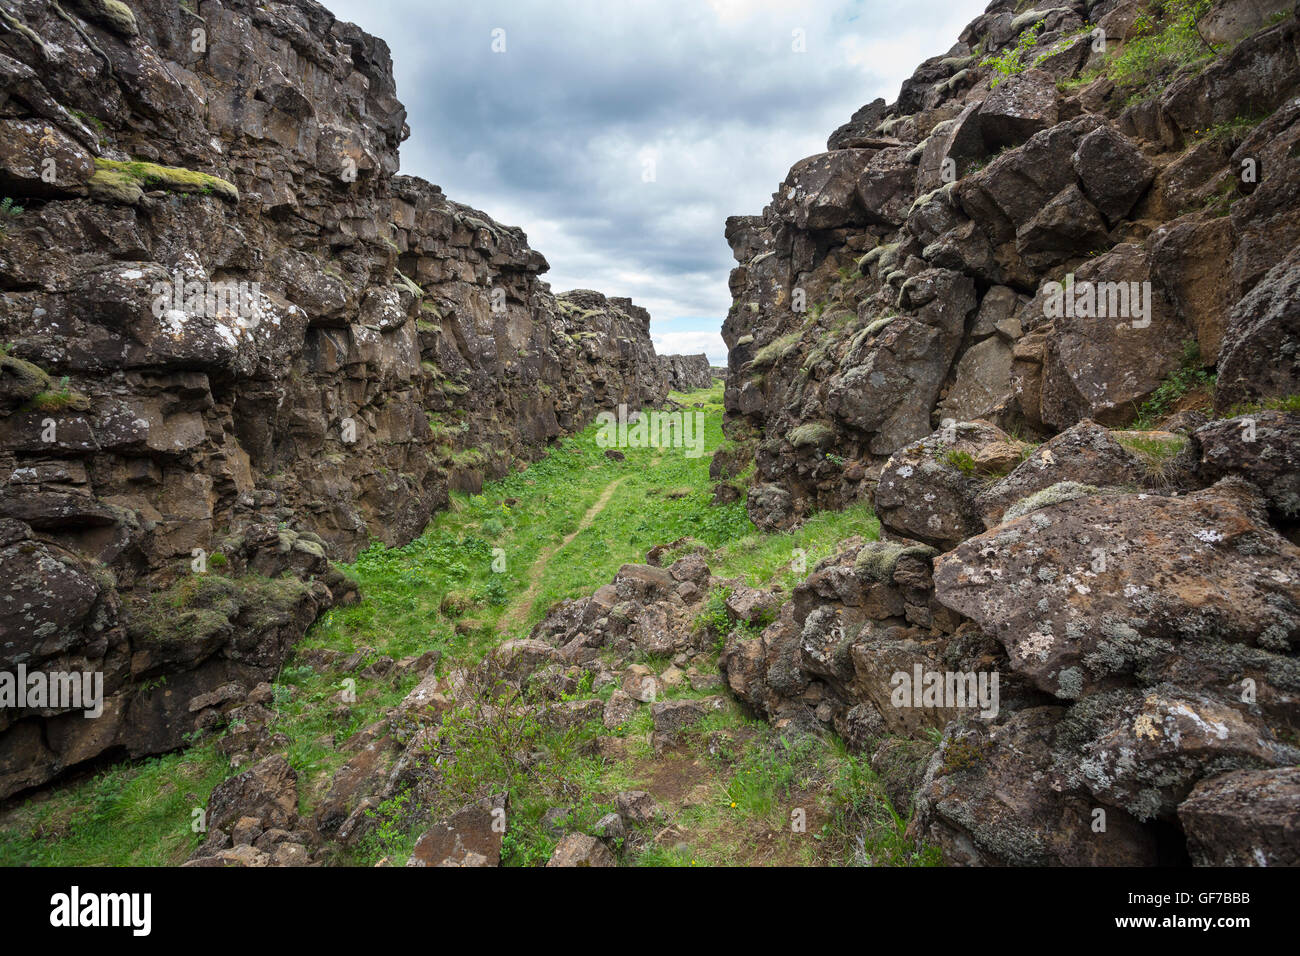 Thingvellir National Park, Iceland, fault in the landscape caused by continental drift between North American and Eurasian tecto Stock Photo